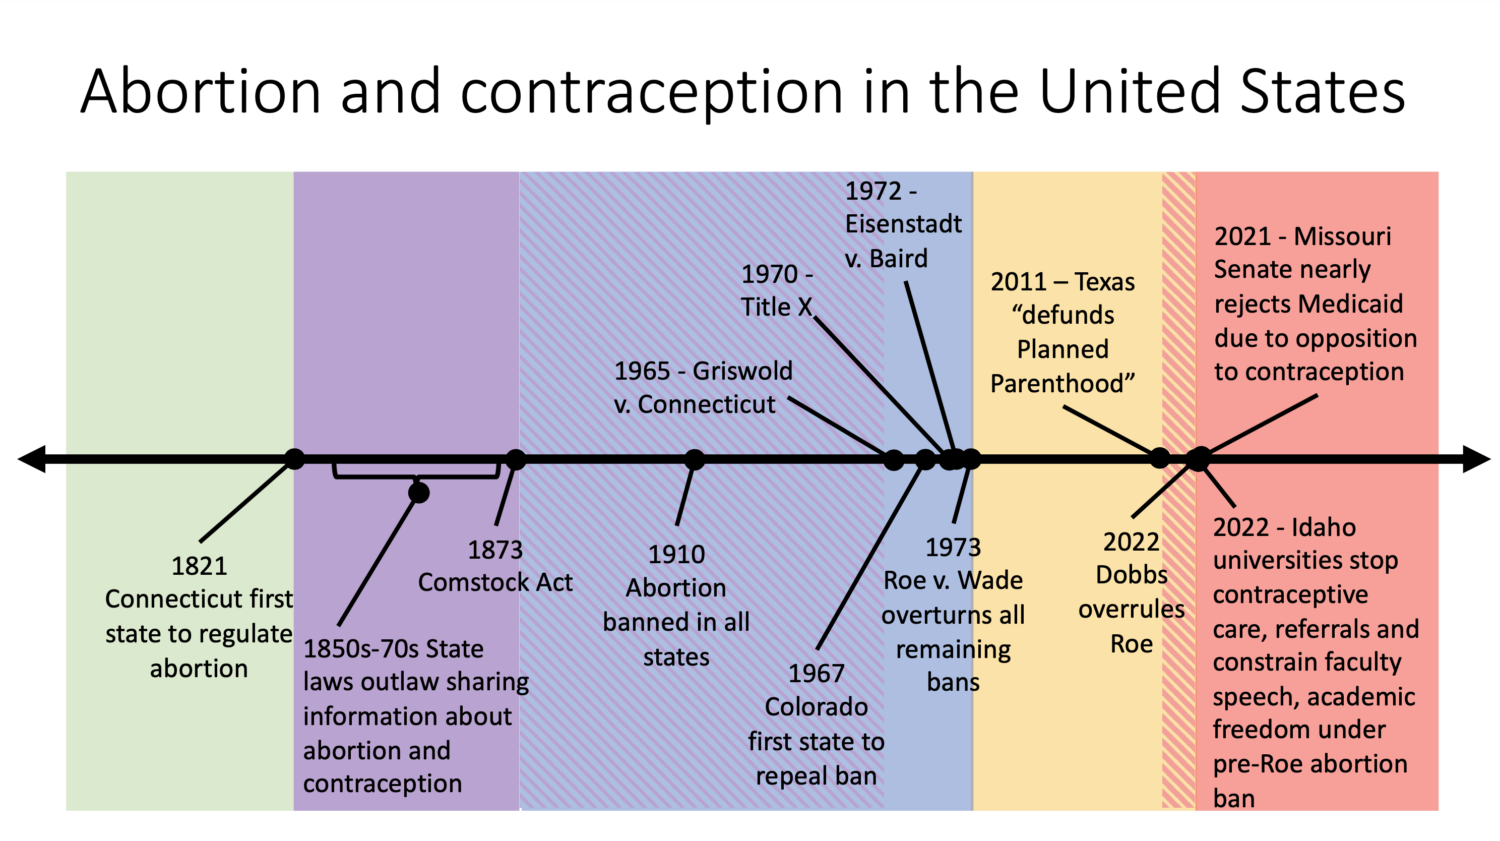 Timeline showing the changing legal status of abortion and contraception over U.S. history, with periods of increasing restriction.